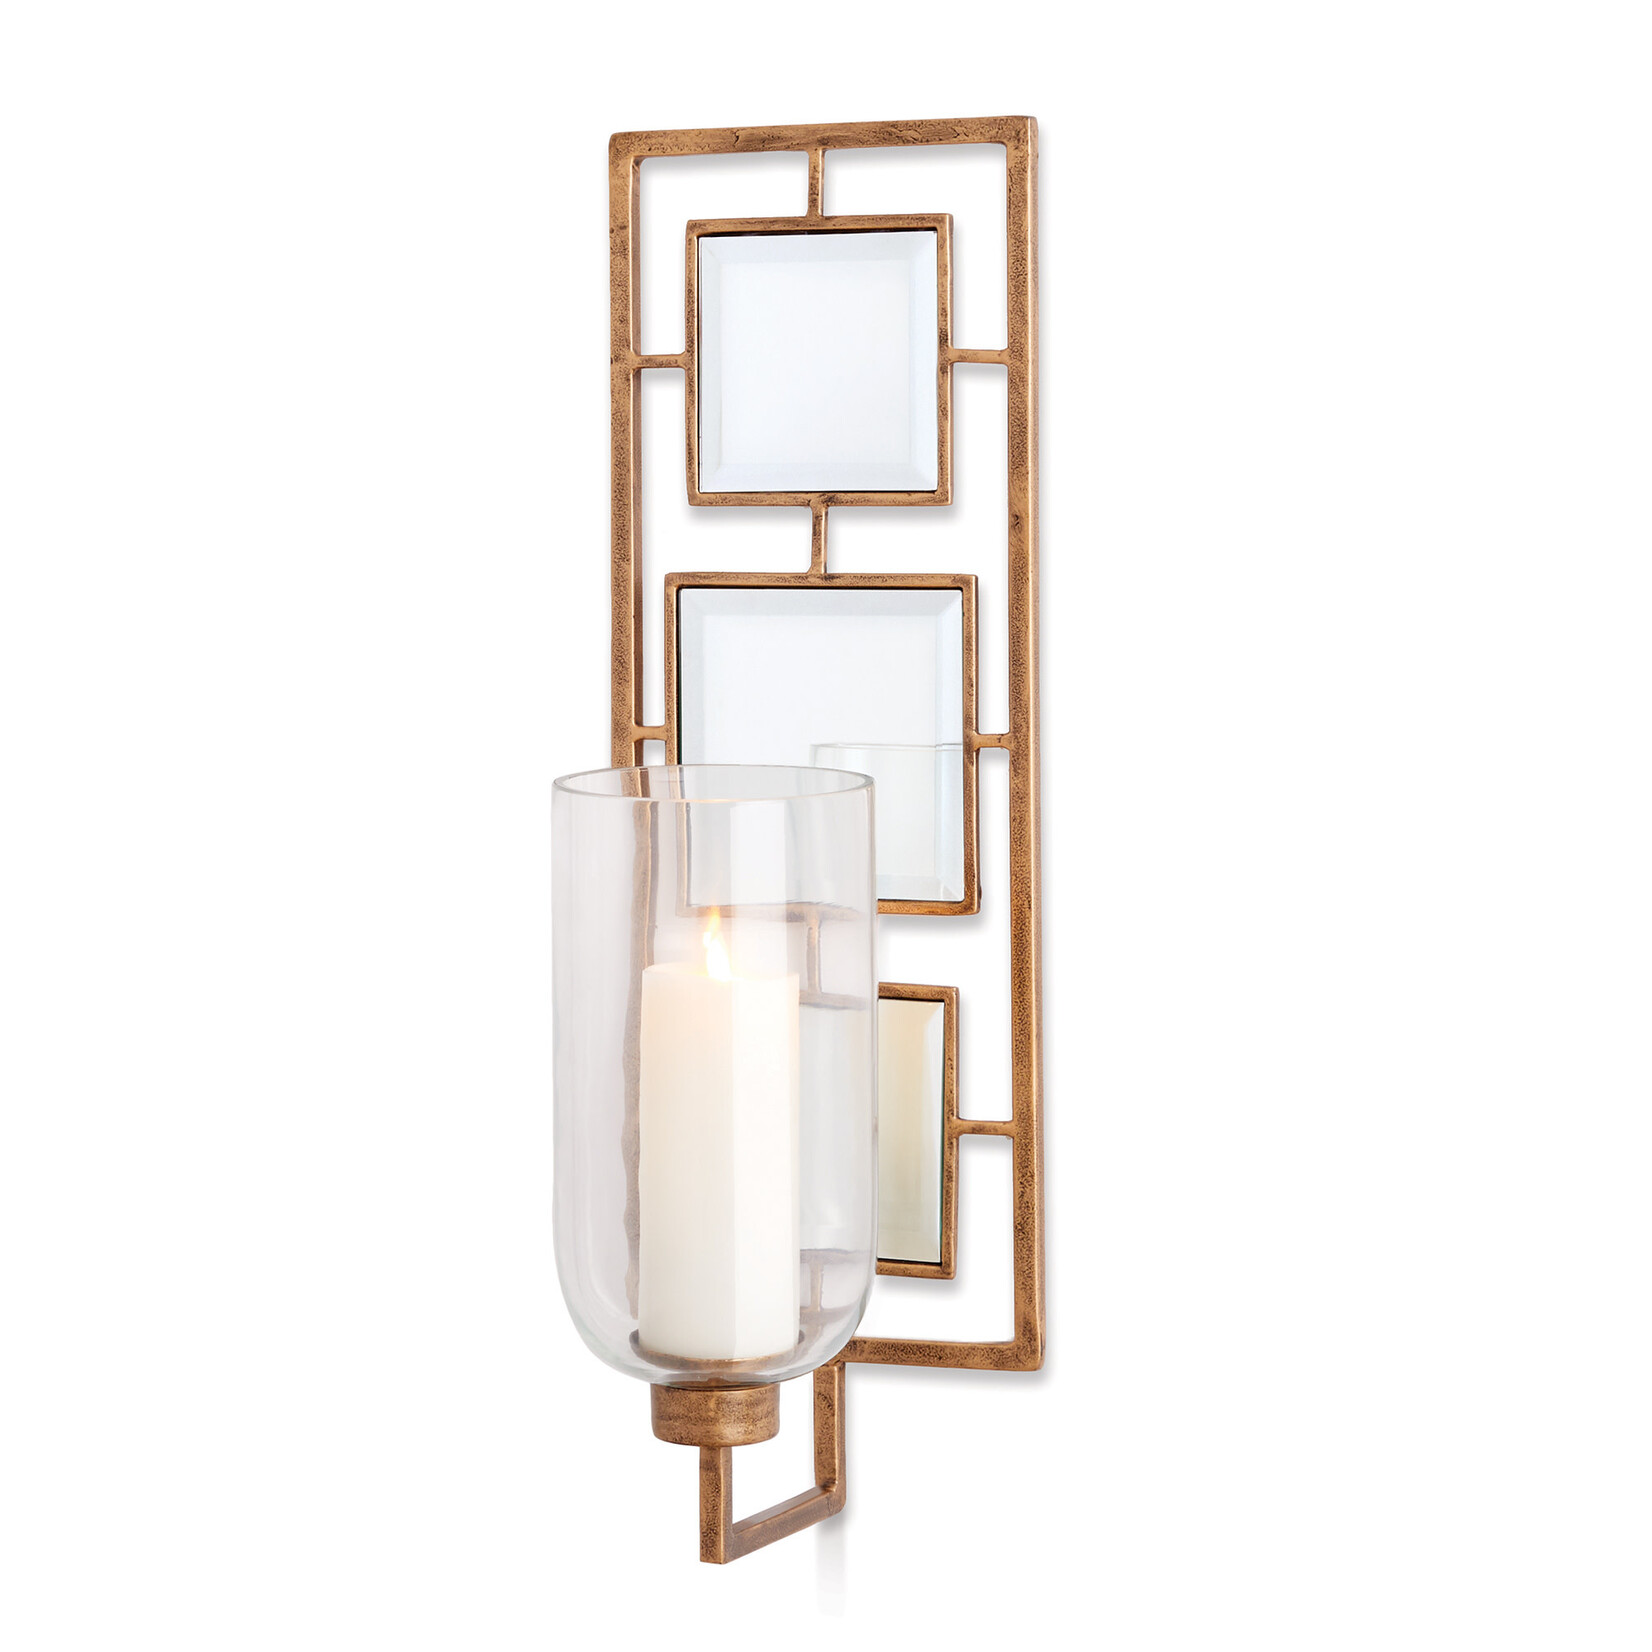 Napa Home and Garden Barclay Butera Wilshire Wall Candle Sconce